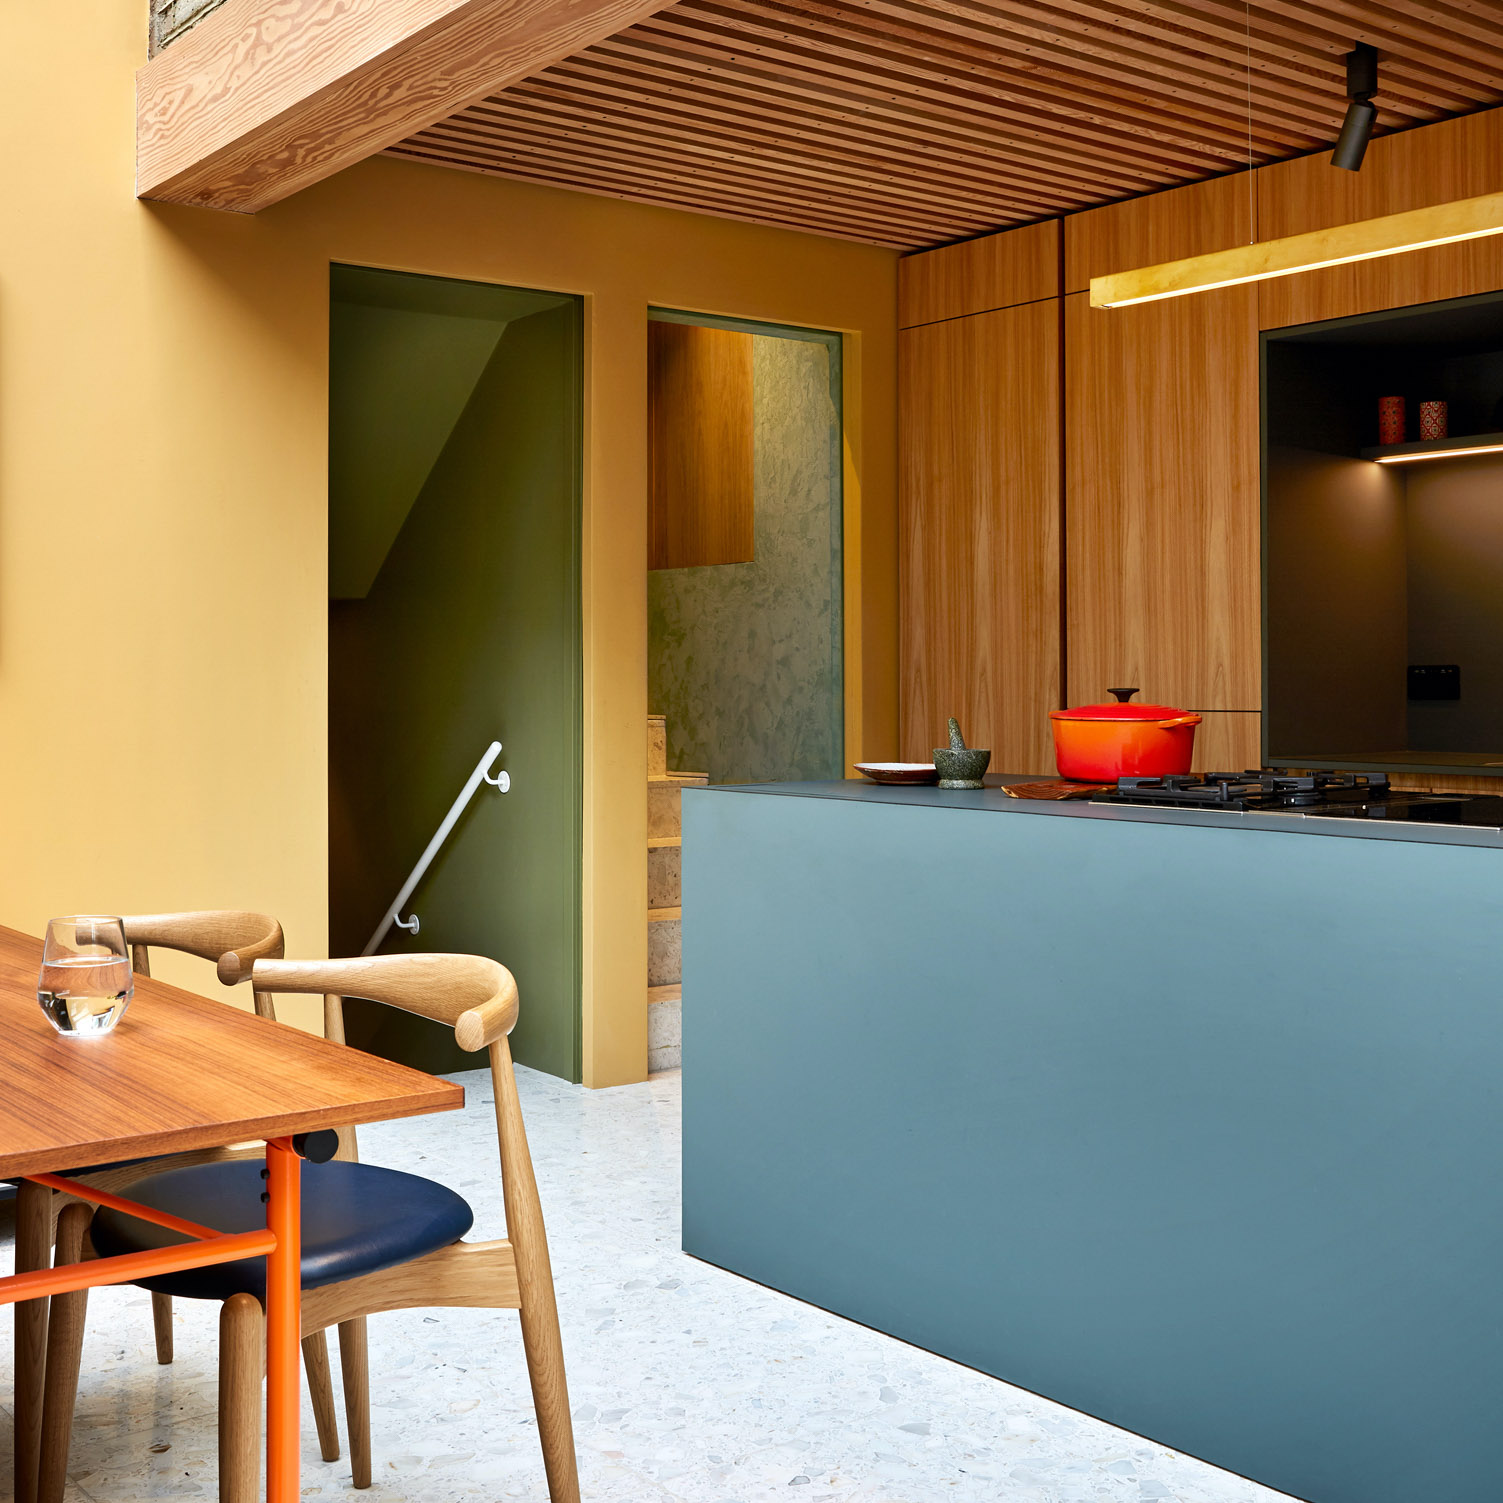 The kitchen of Upside Down House has a modern, scandinavian style